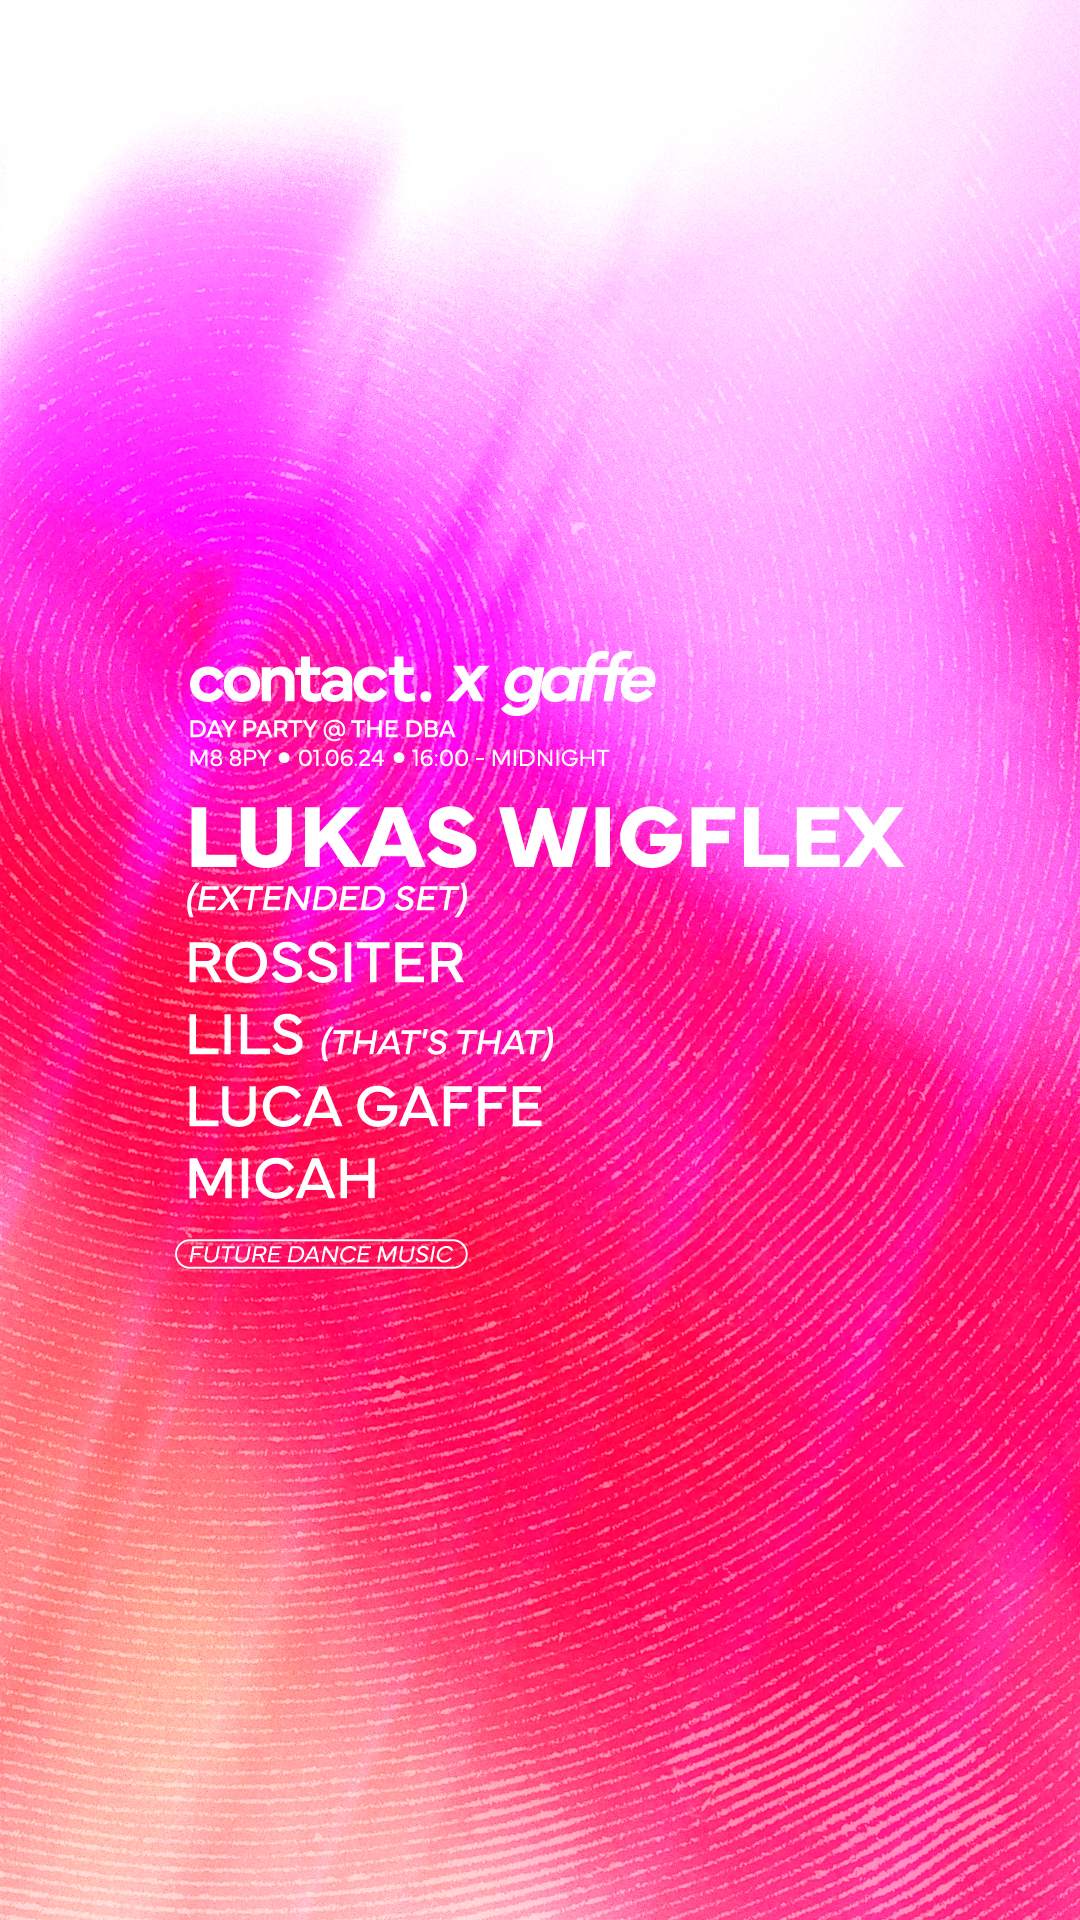 Contact x GAFFE Day Party: Lukas Wigflex + more - フライヤー裏